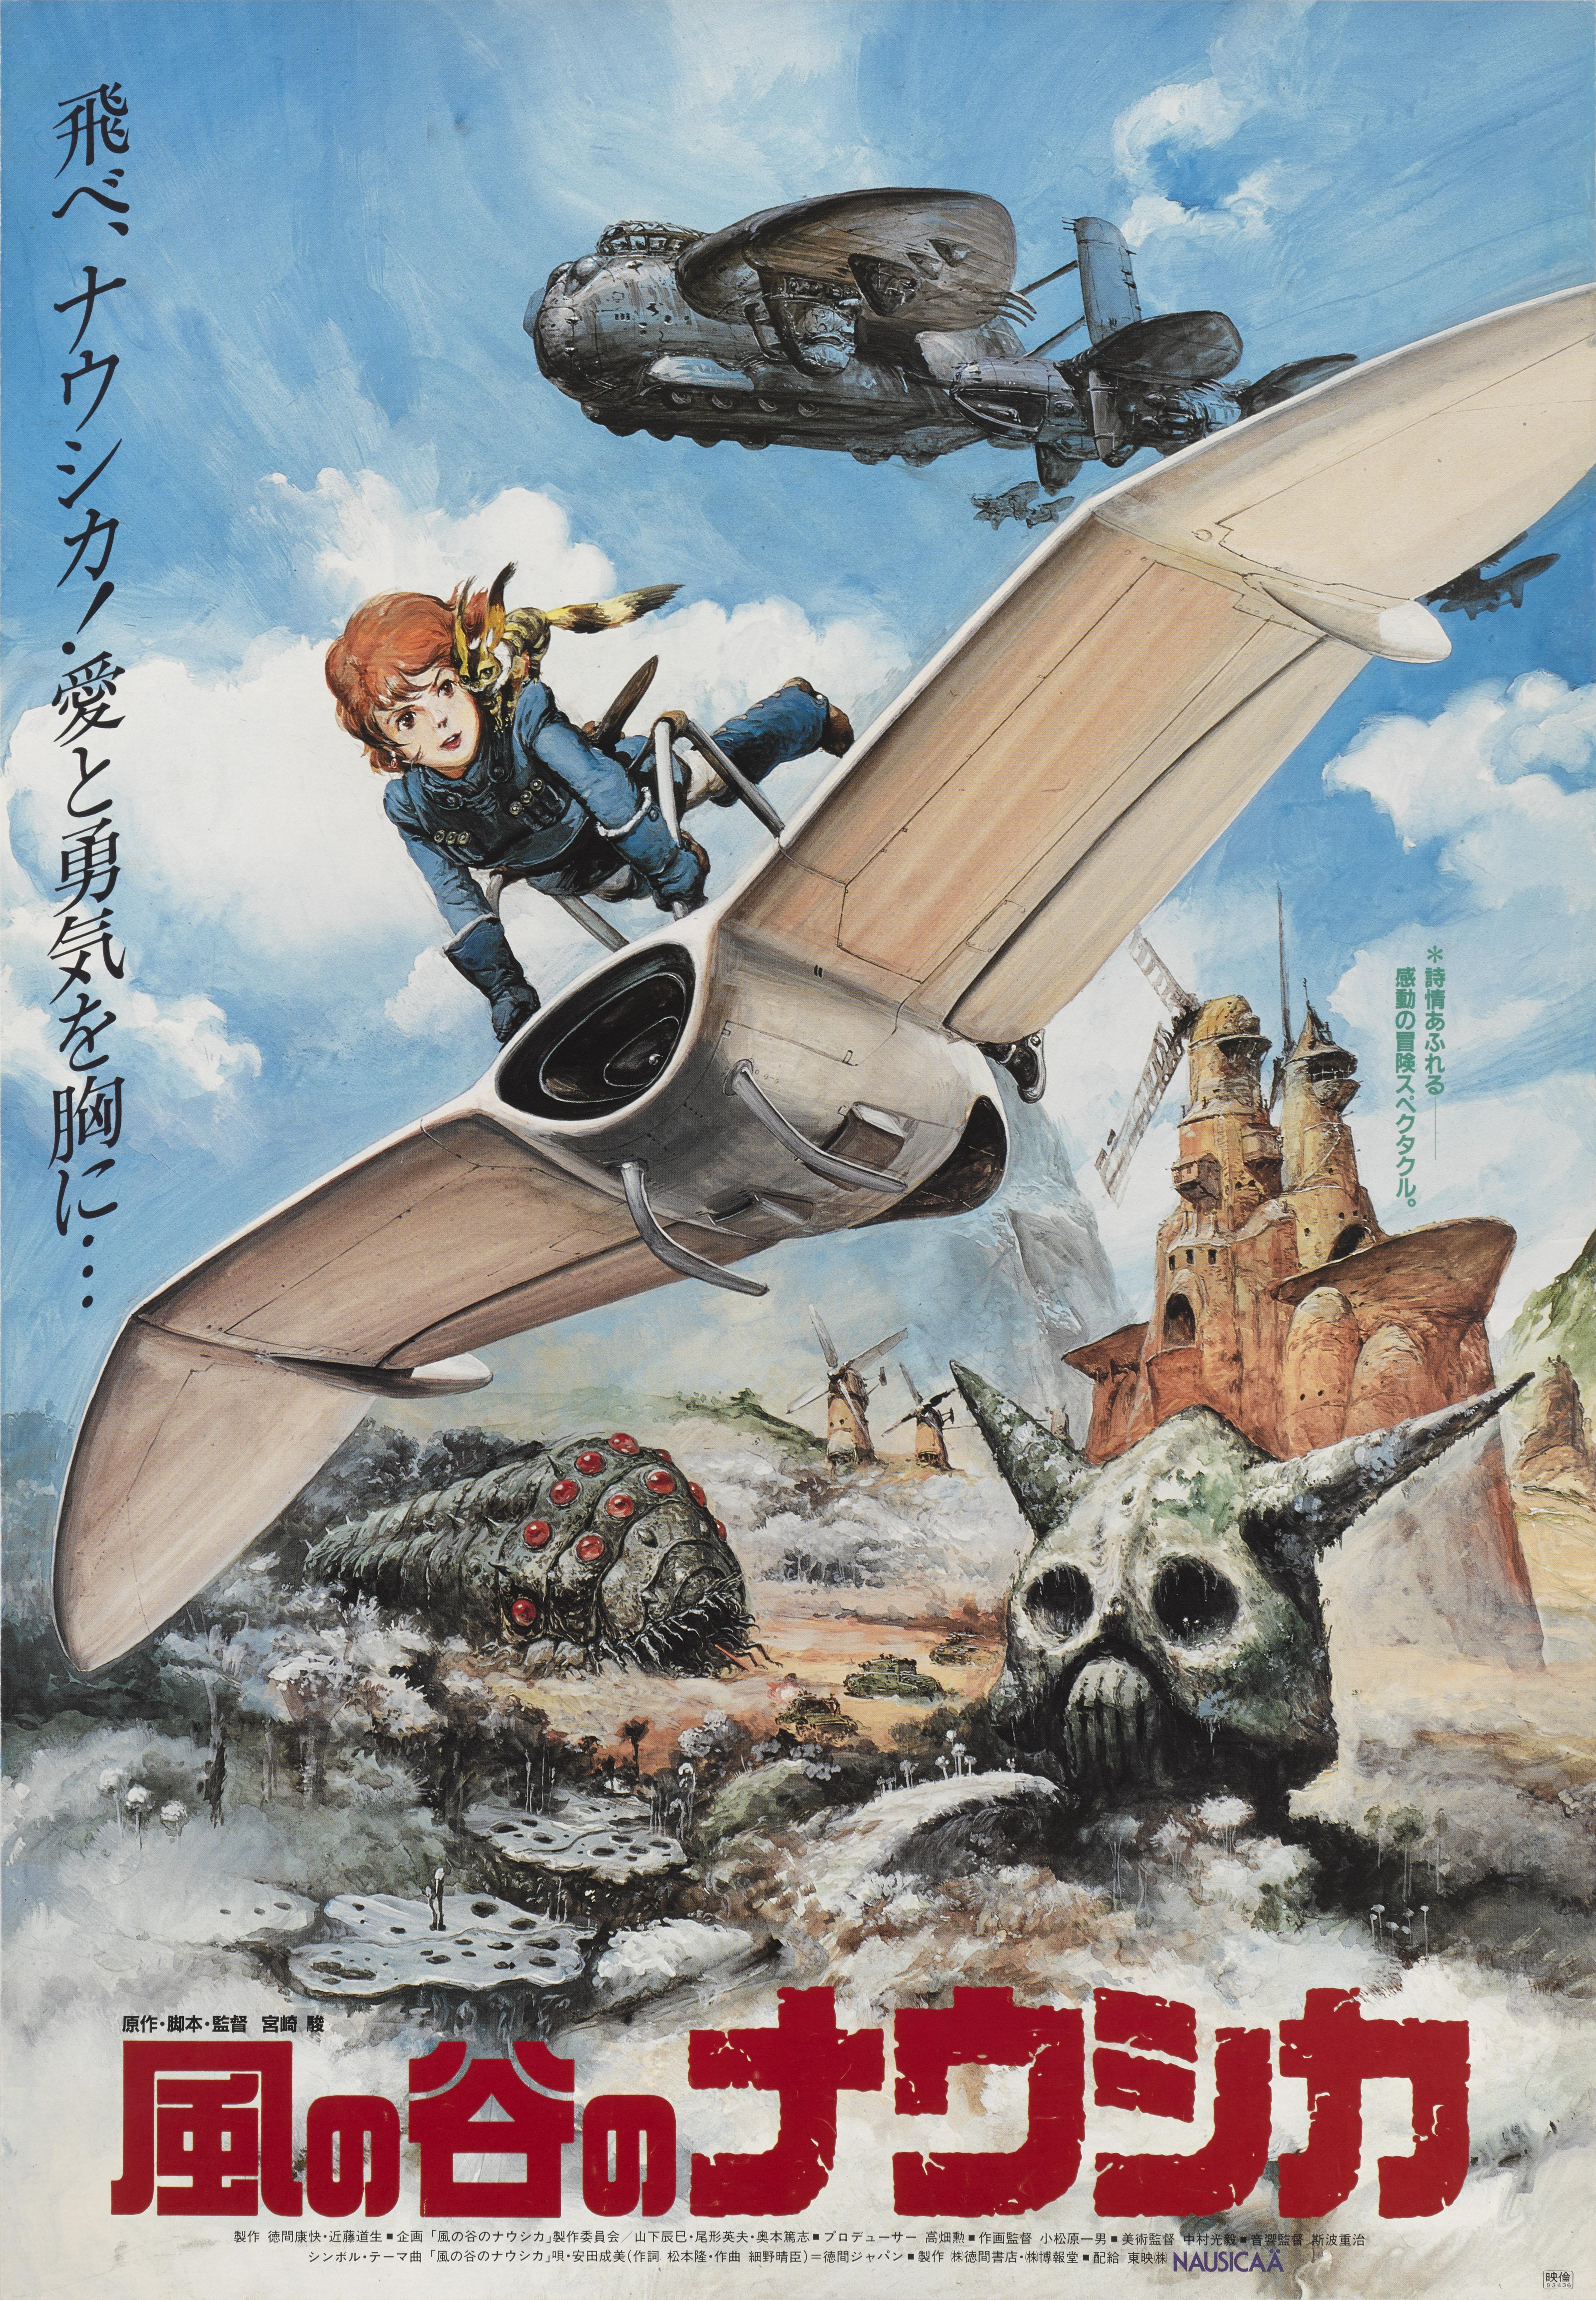 Original Japanese film poster for the 1984 Japanese Animation directed by Hayao Miyazaki.
The artwork on this poster was used on this style C poster.
This poster is unfolded and conservation linen backed. It would be shipped rolled in a very